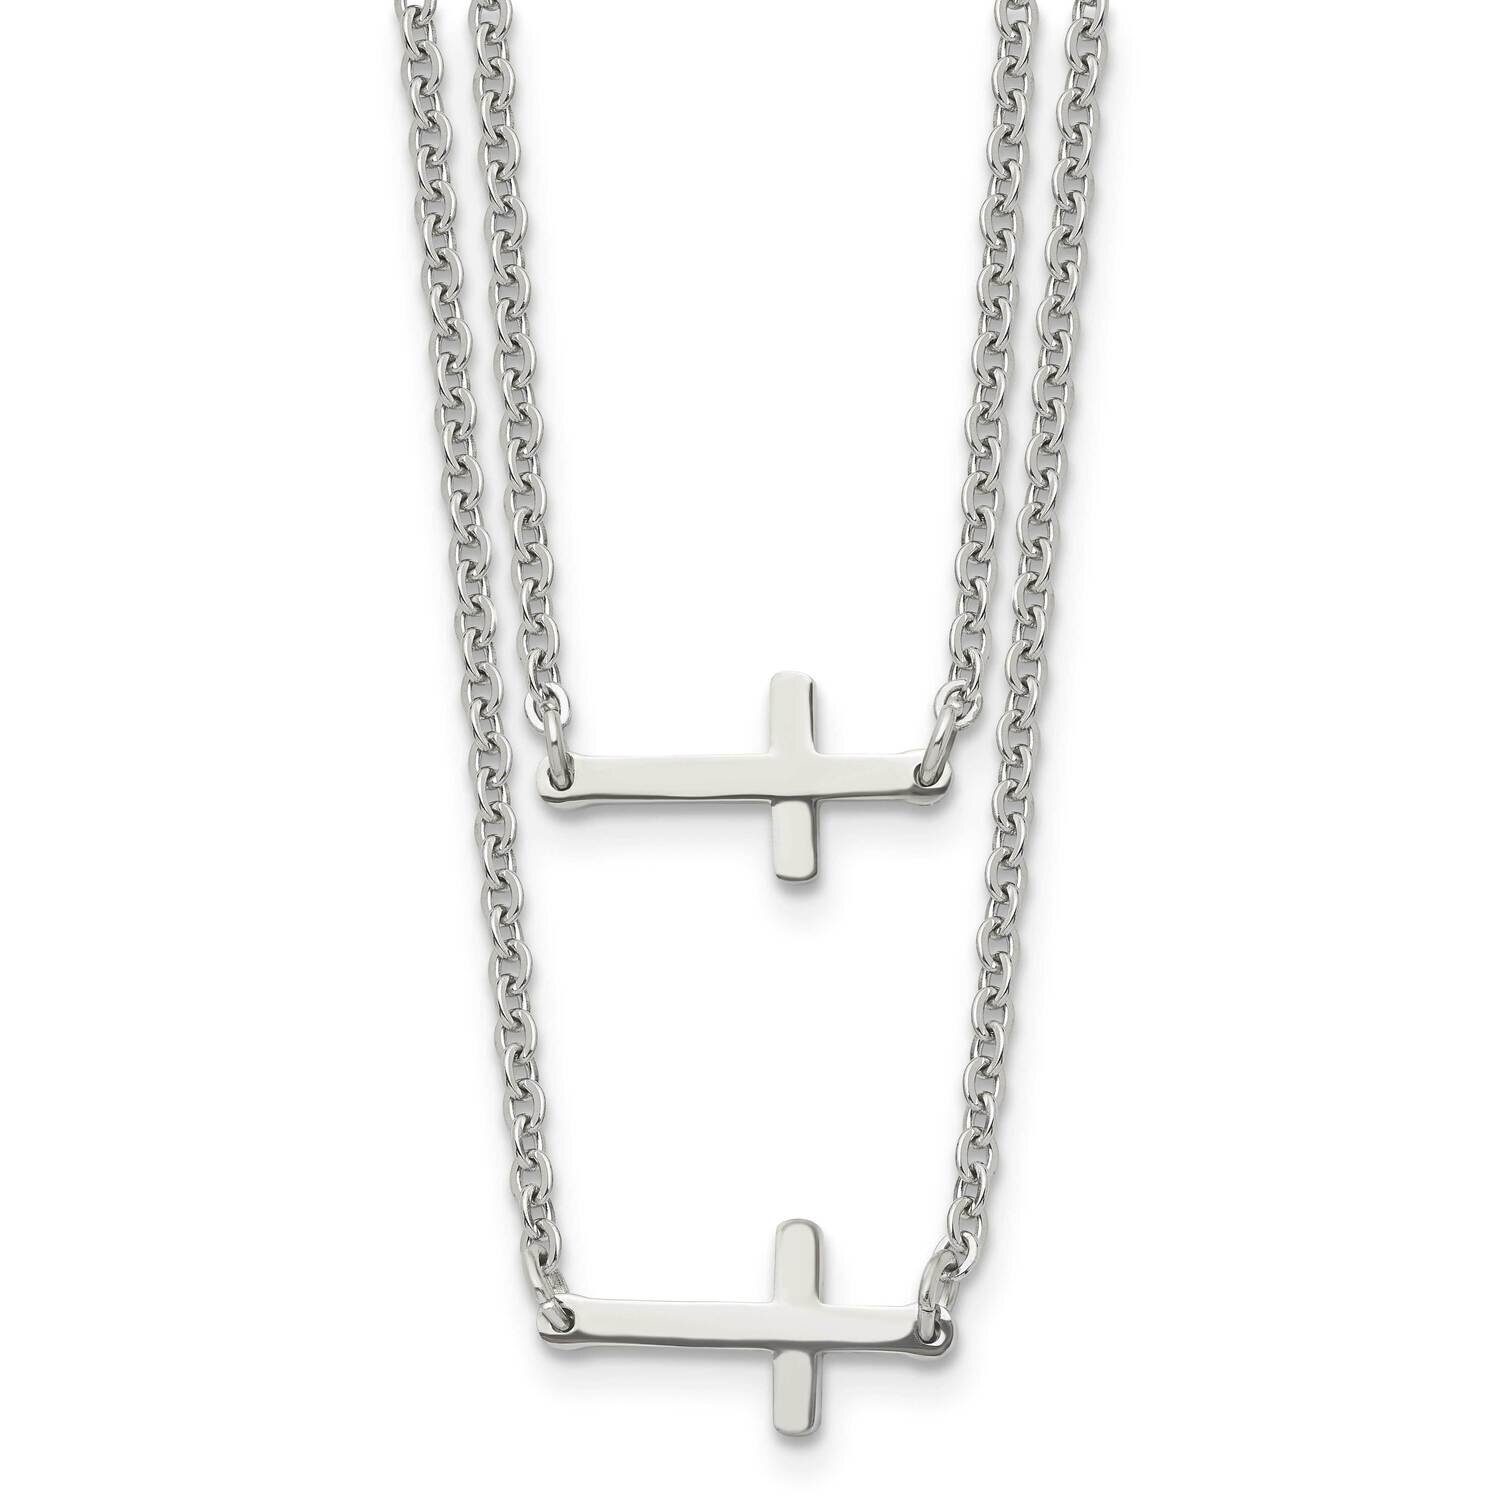 Double Sideways Crosses Layered Necklace Stainless Steel SRN1205-16.5